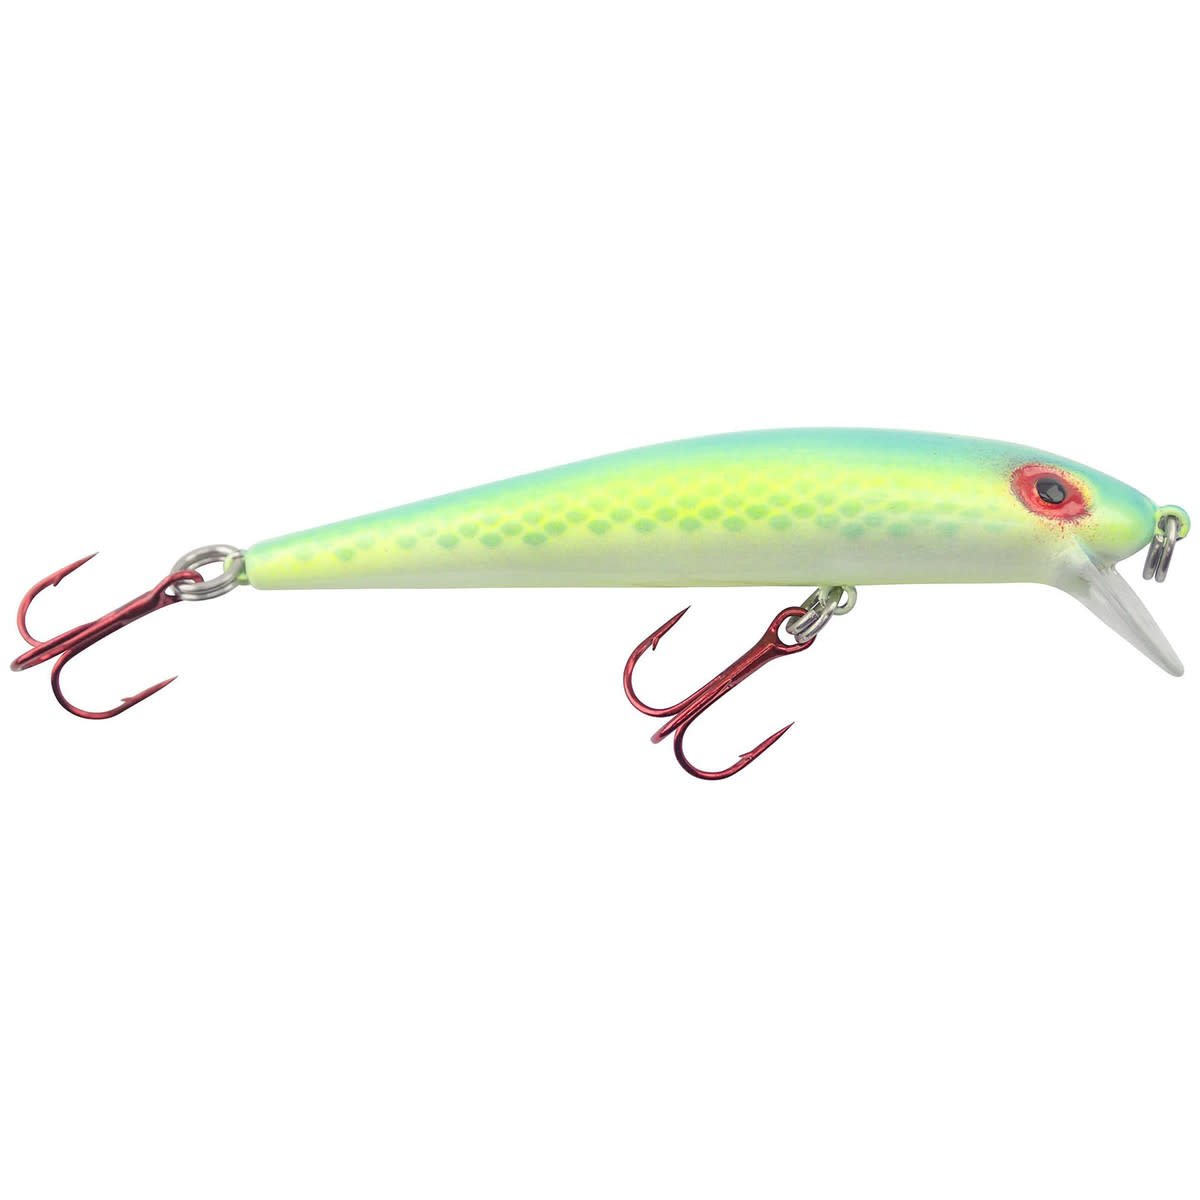 Bay Rat Lures Bay Rat Lures 3-1/2 5/16oz Citric Shad - All Seasons Sports